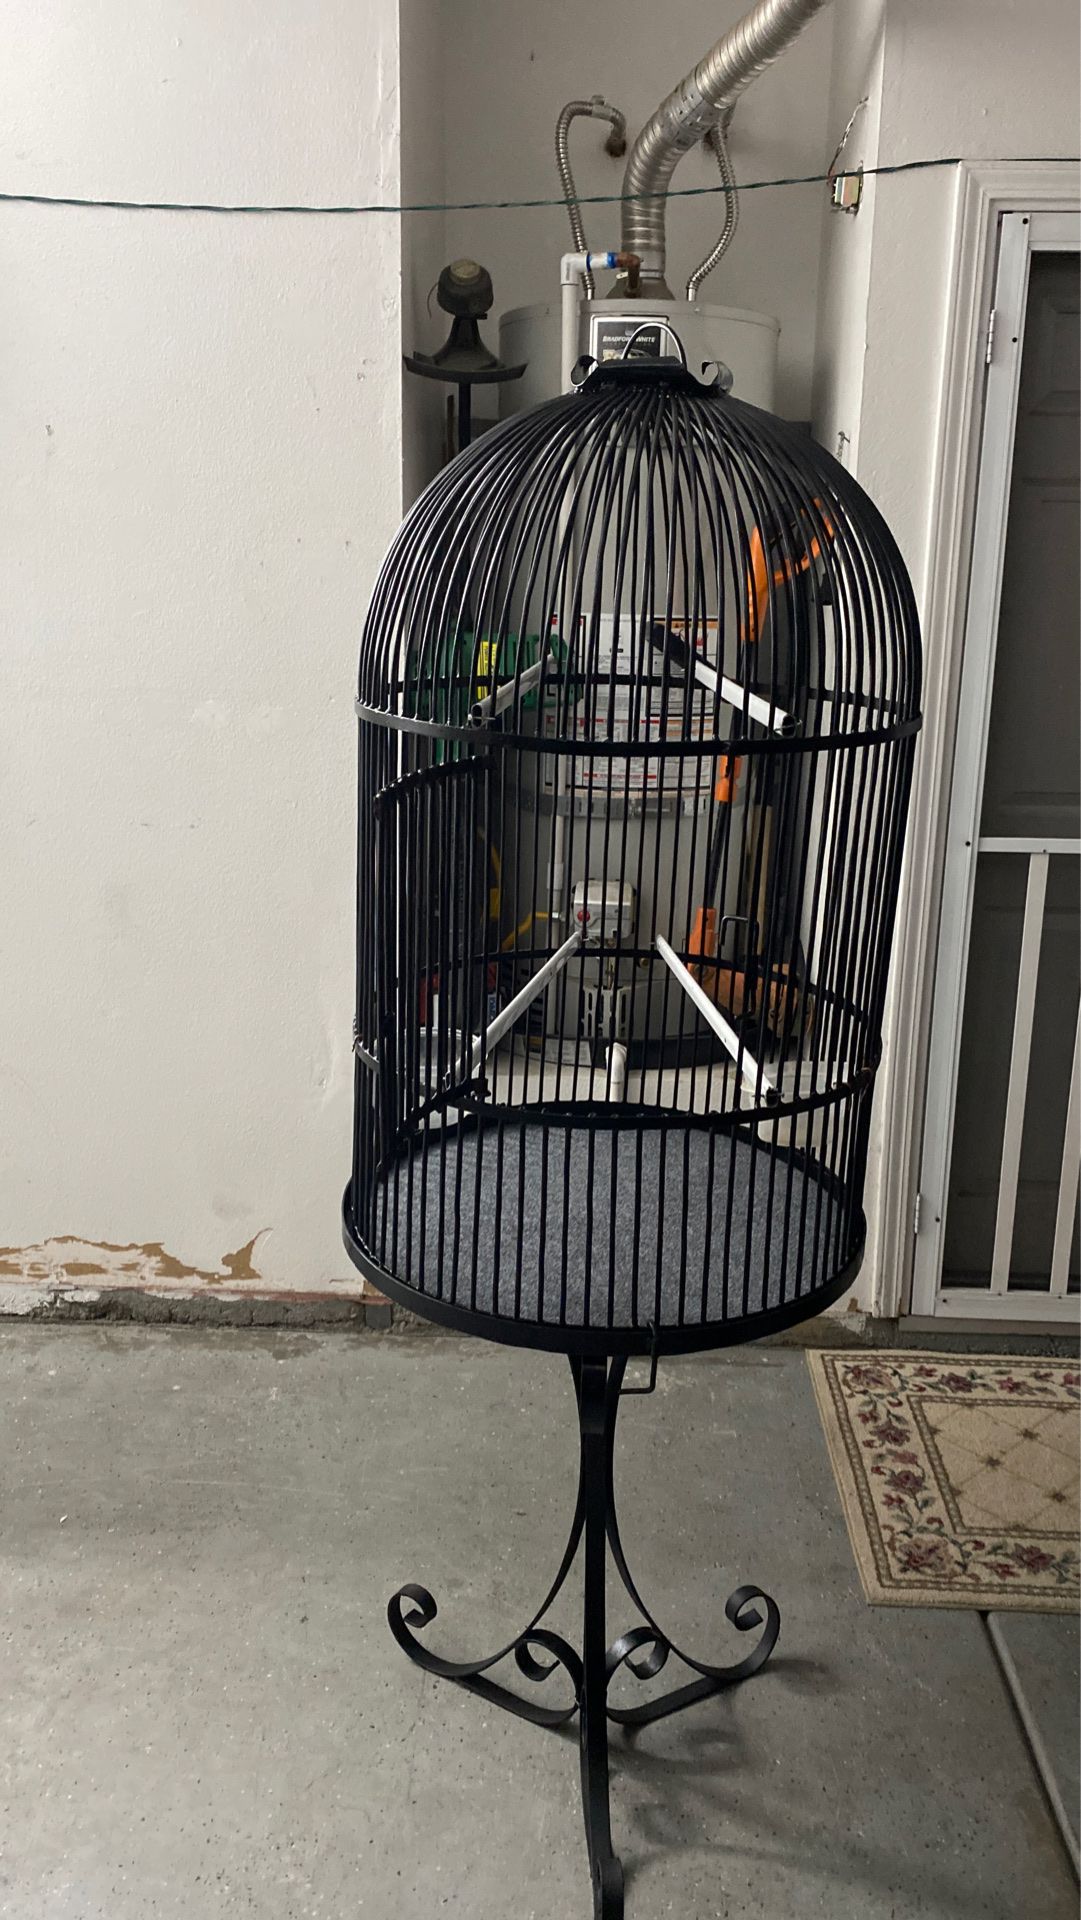 T 44 X R 78 nice clean good condition bird cage come with T 32 X R 78 nice clean good condition stand 2 dishes and carpet $ 99.